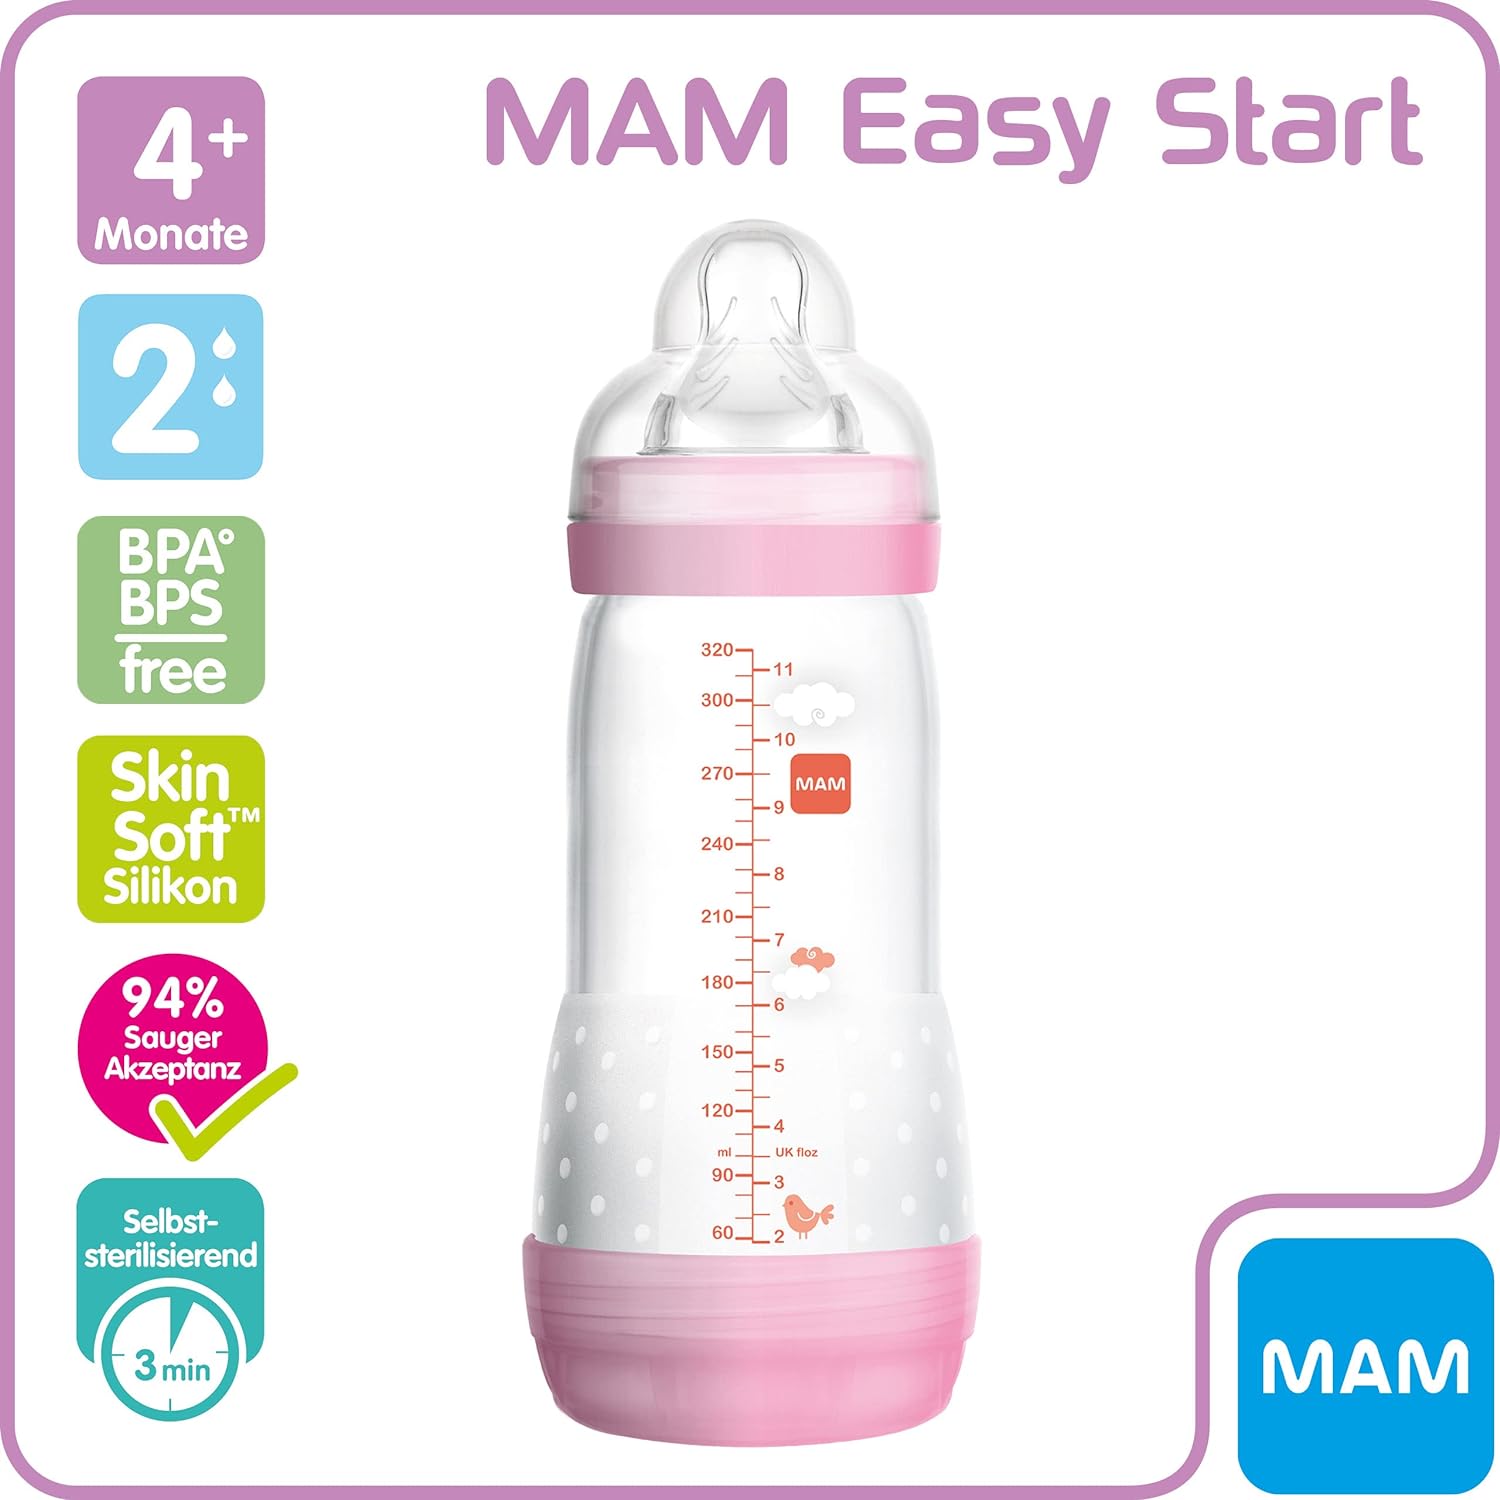 MAM Easy Start Anti-Colic Baby Bottle Set of 2 (260 ml), Milk Bottle with Innovative Bottom Anti-Colic Valve, Baby Drinking Bottle with Teat Size 1, from Birth, Seal